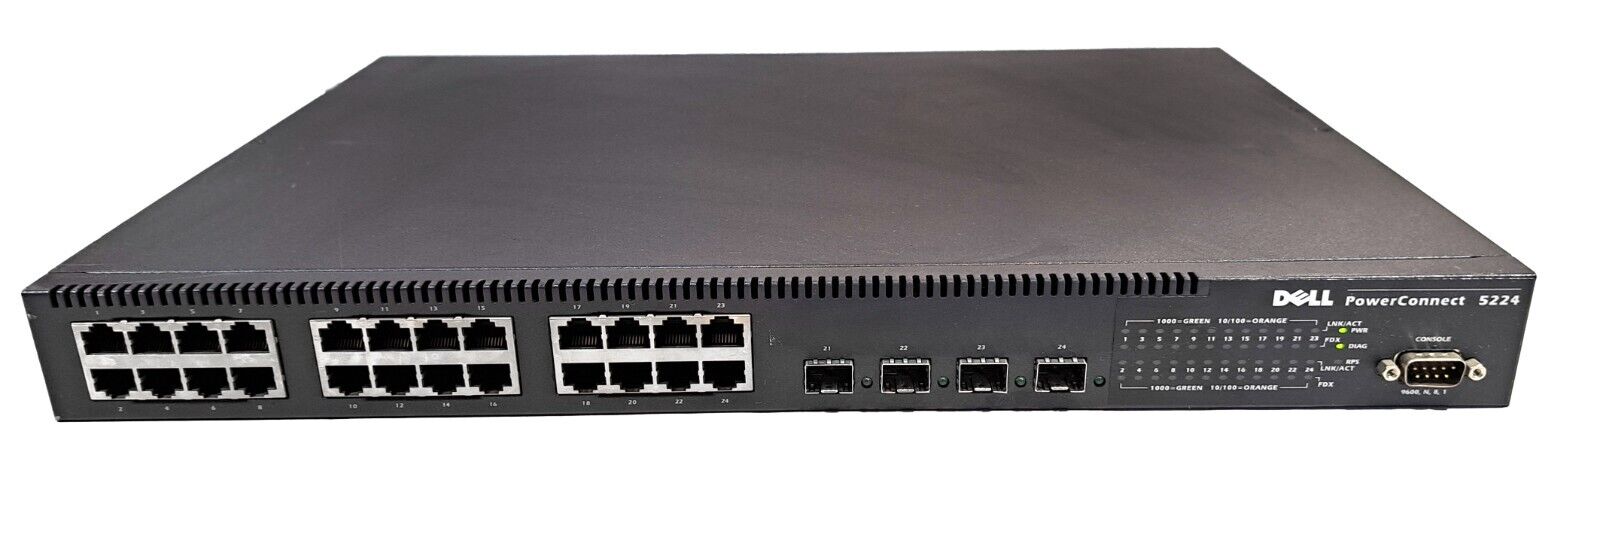 Dell PowerConnect 5224 24-Port Managed Gigabit Ethernet Switch 3N359